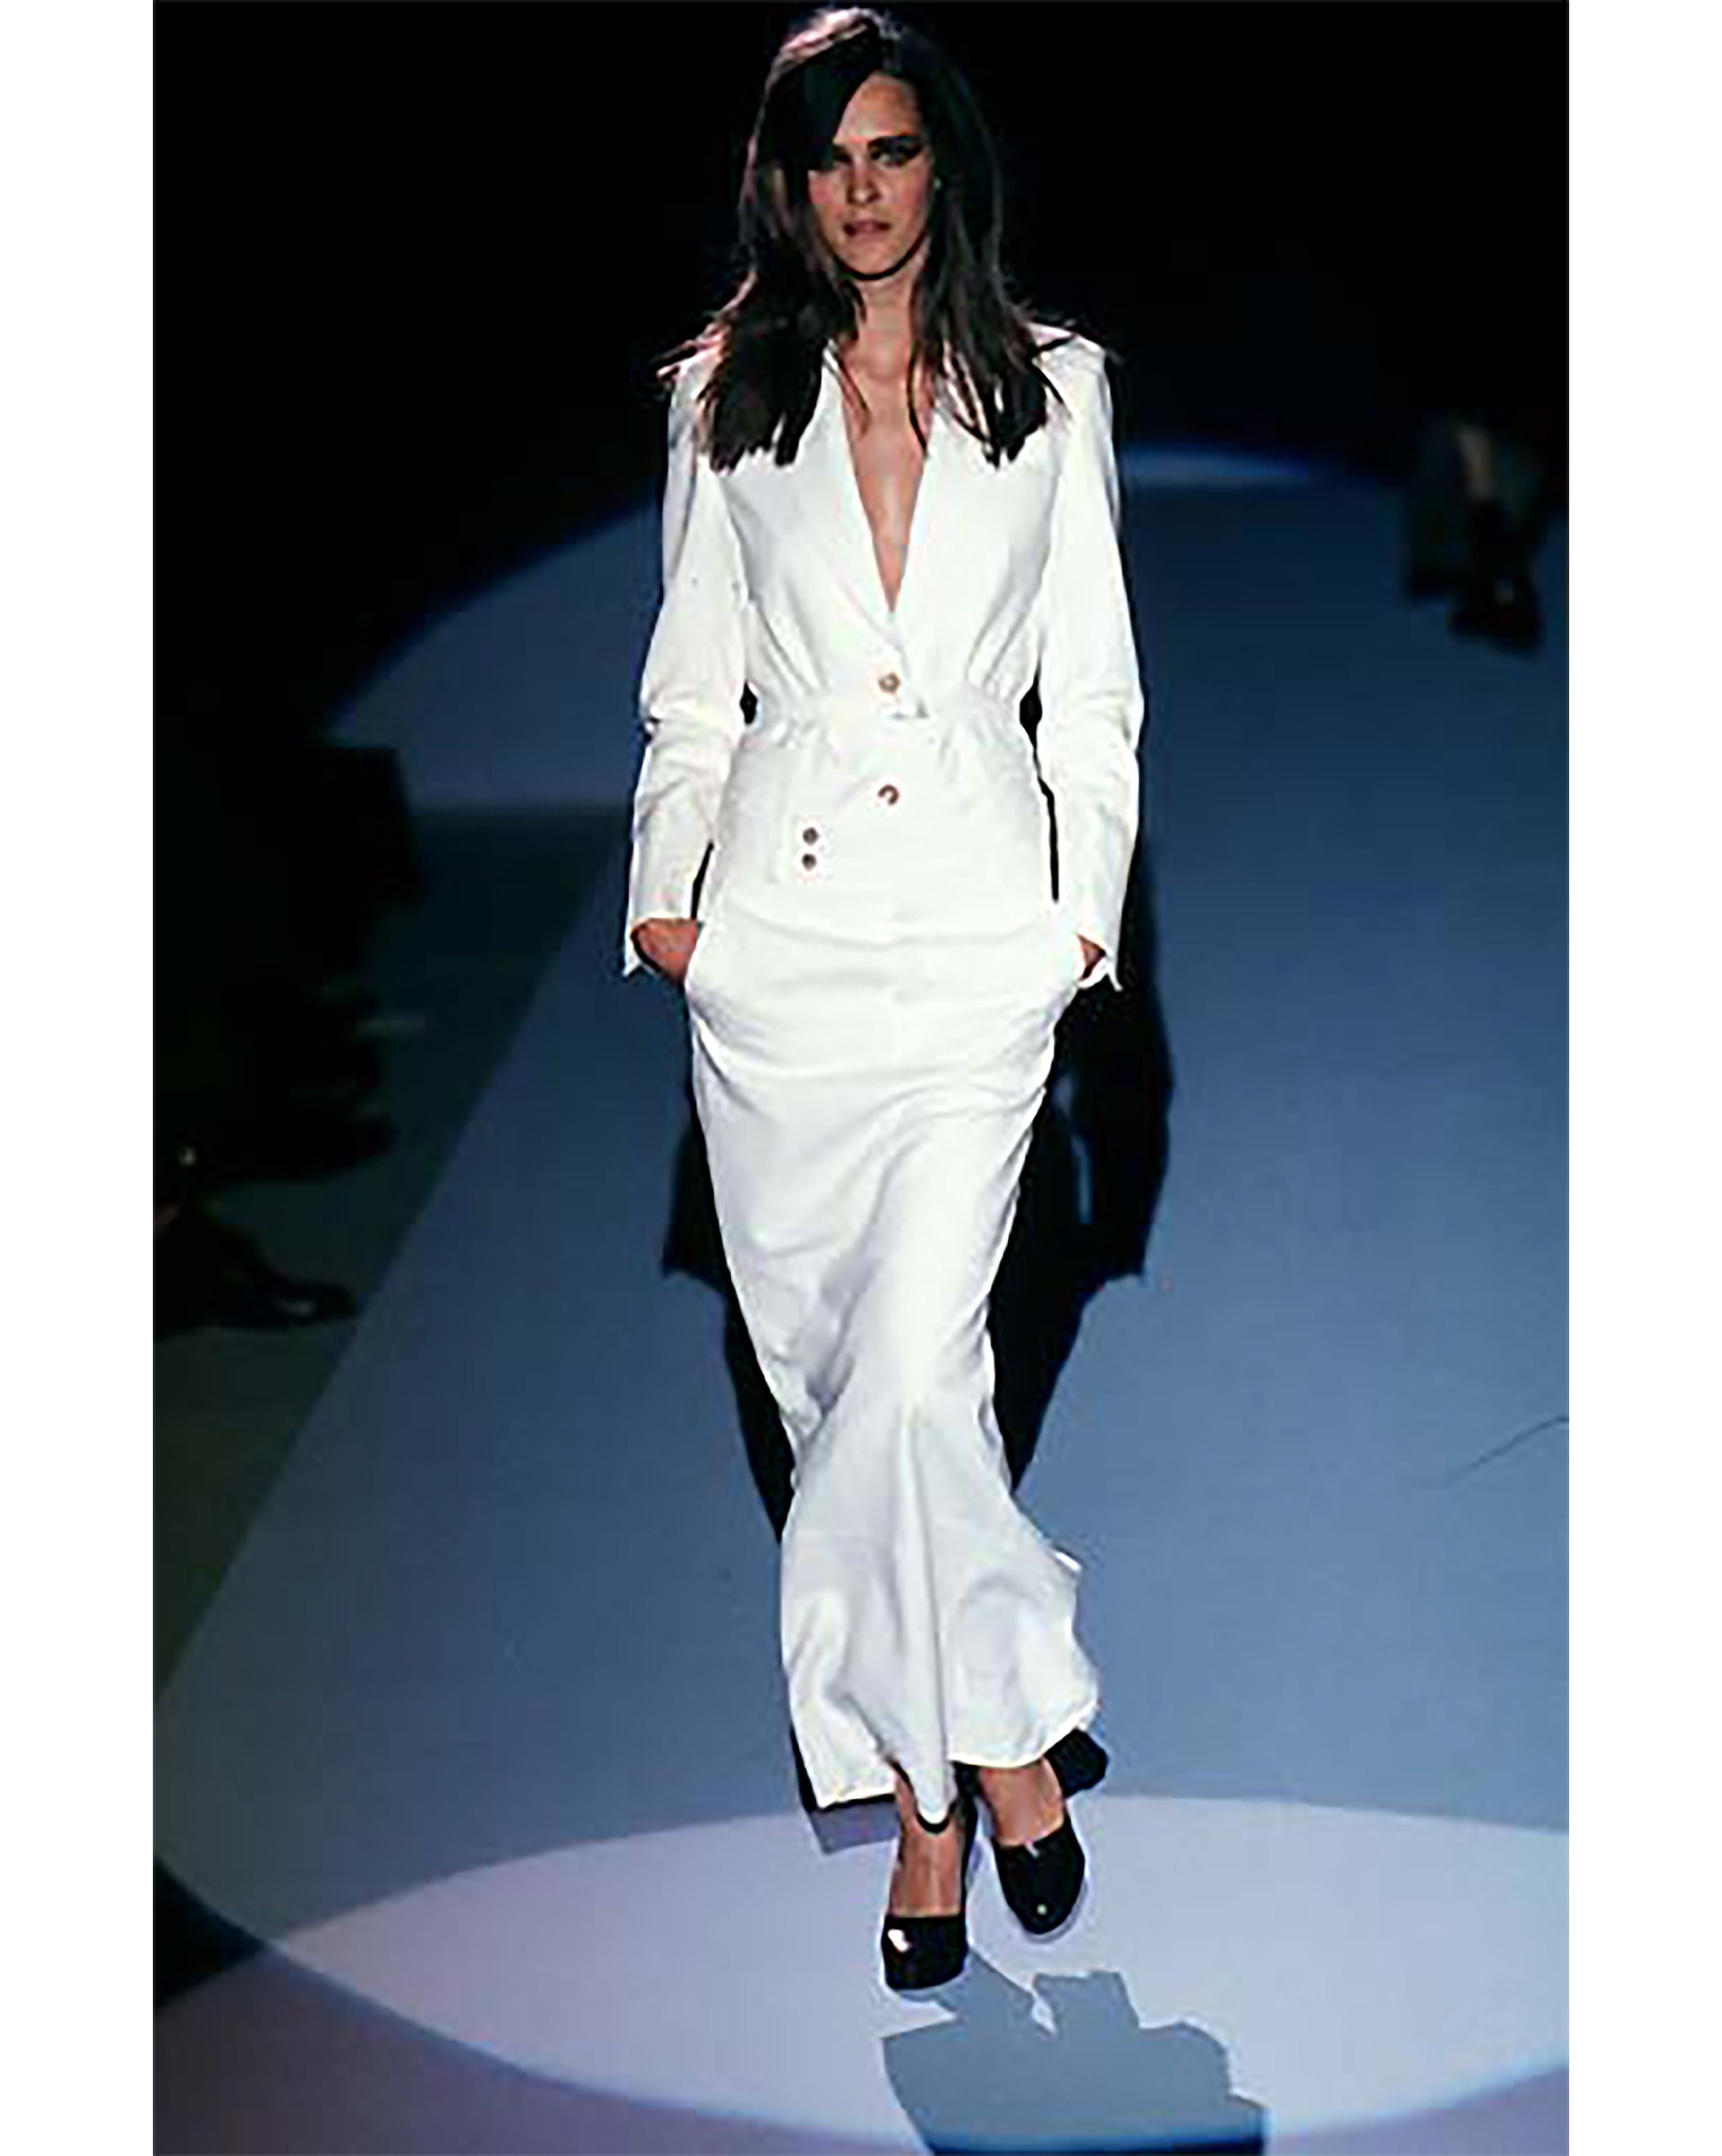 A/W 1998 Gucci by Tom Ford ecru skirt set. Button-up collared blazer with maxi skirt with high back slit. Jacket has slight built-in shoulder pads. Off-white 100% felt wool fabric throughout. Skirt has front button closures and features signature